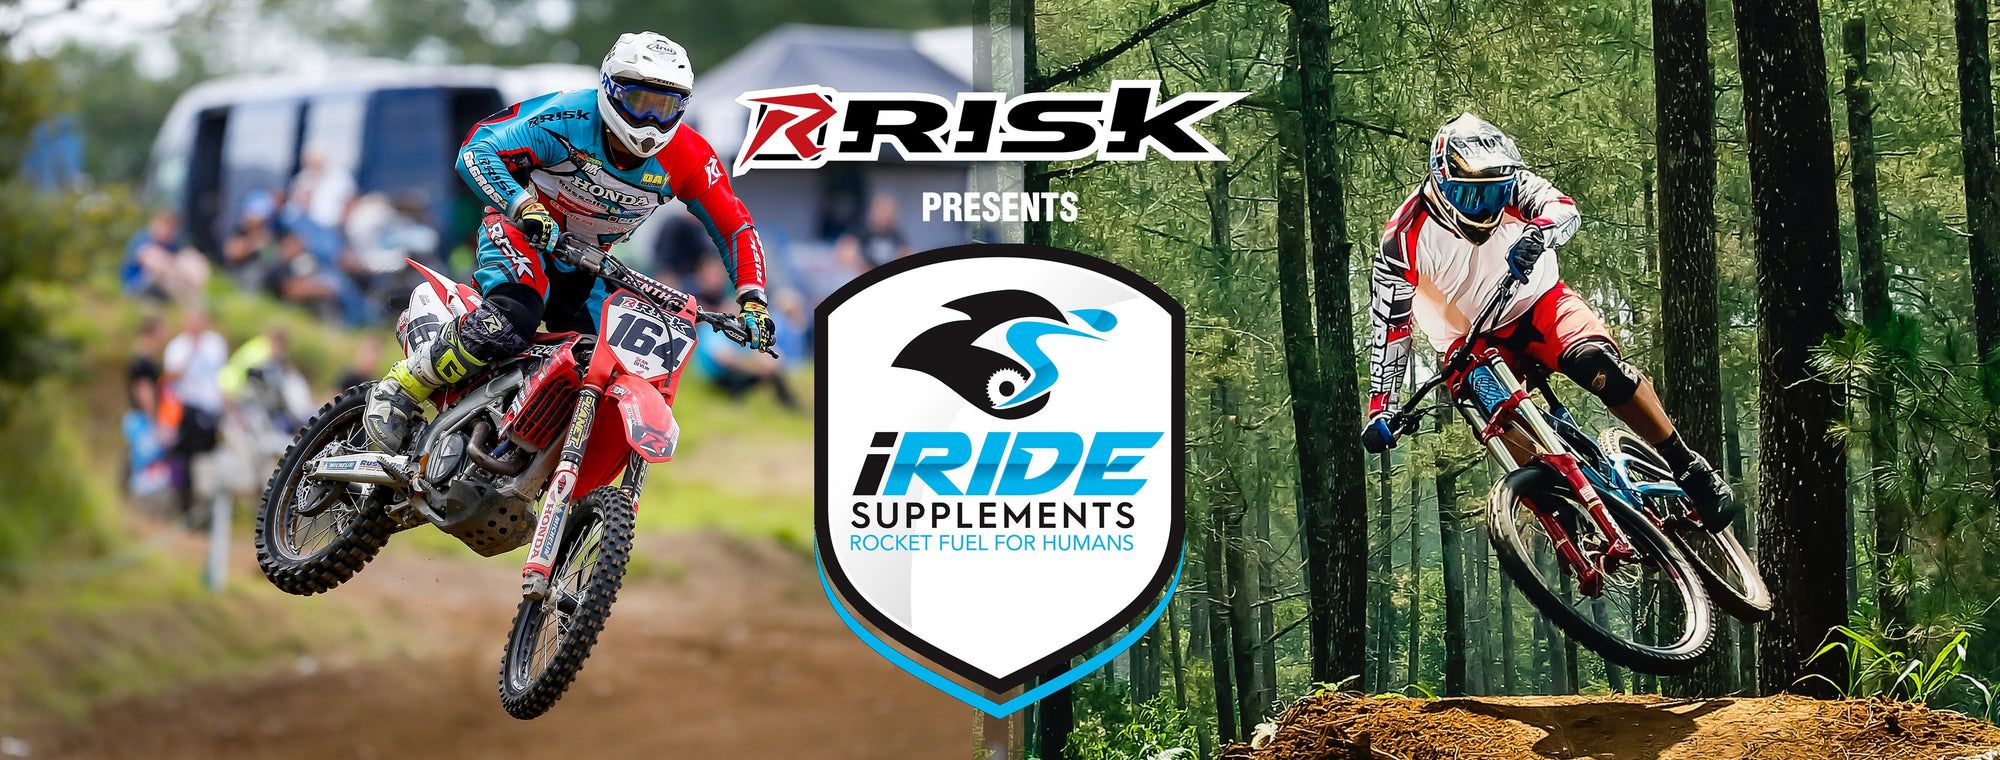 Motocross rider & mountain bike rider split image with graphics reading RISK Presents iRide Supplements